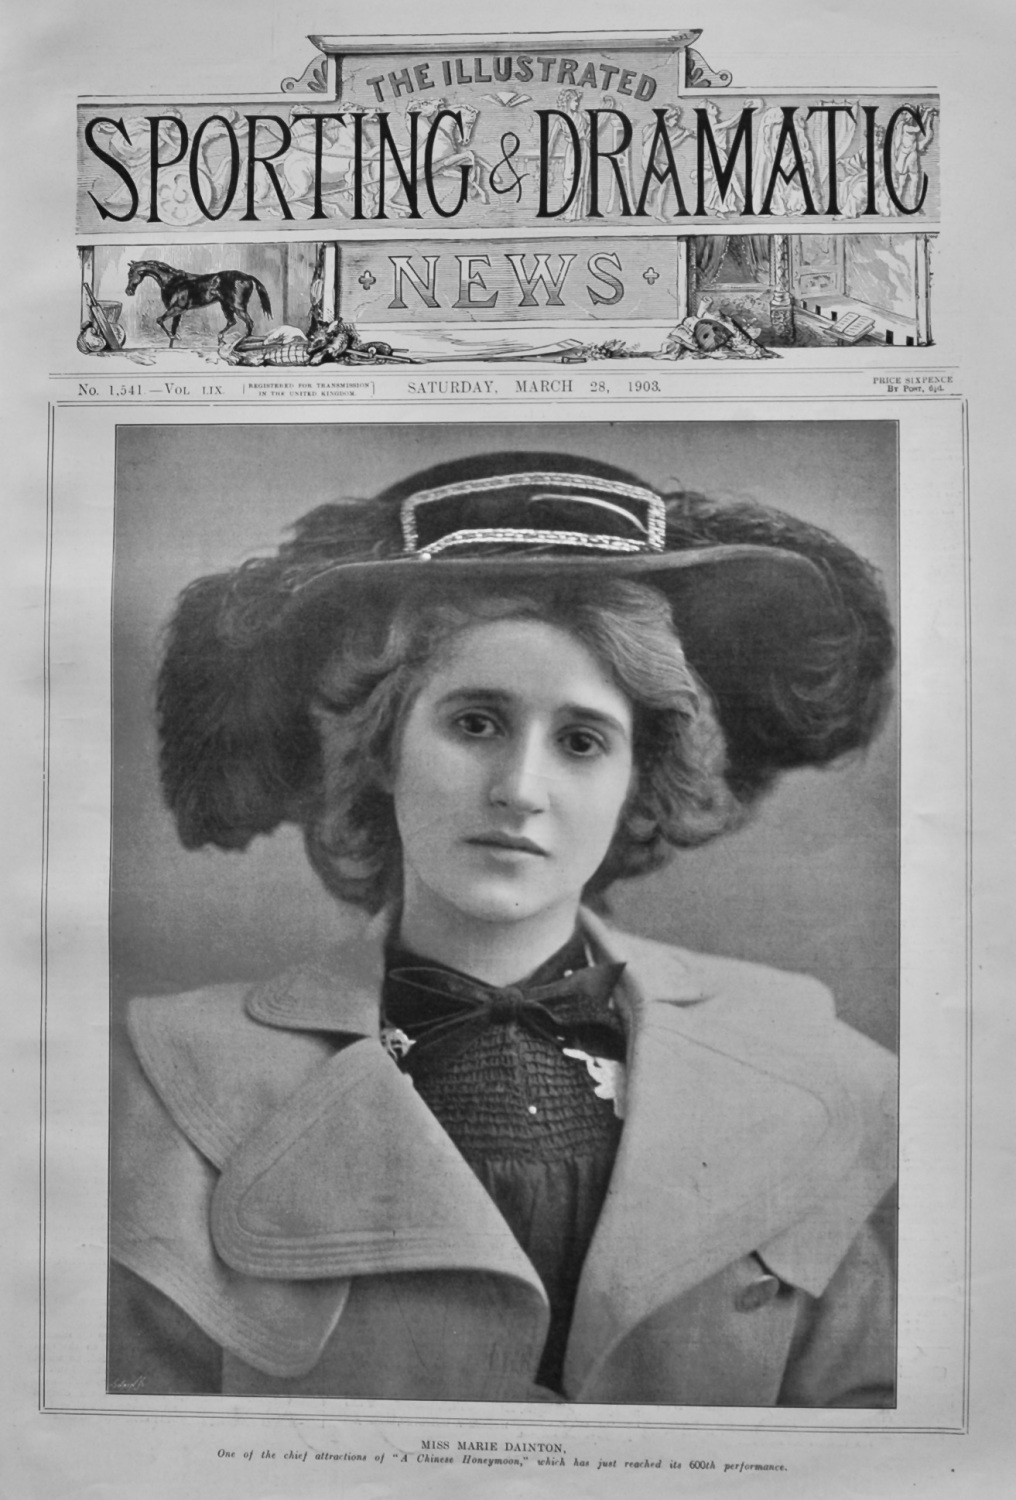 Miss Marie Dainton, one of the chief attractions of 